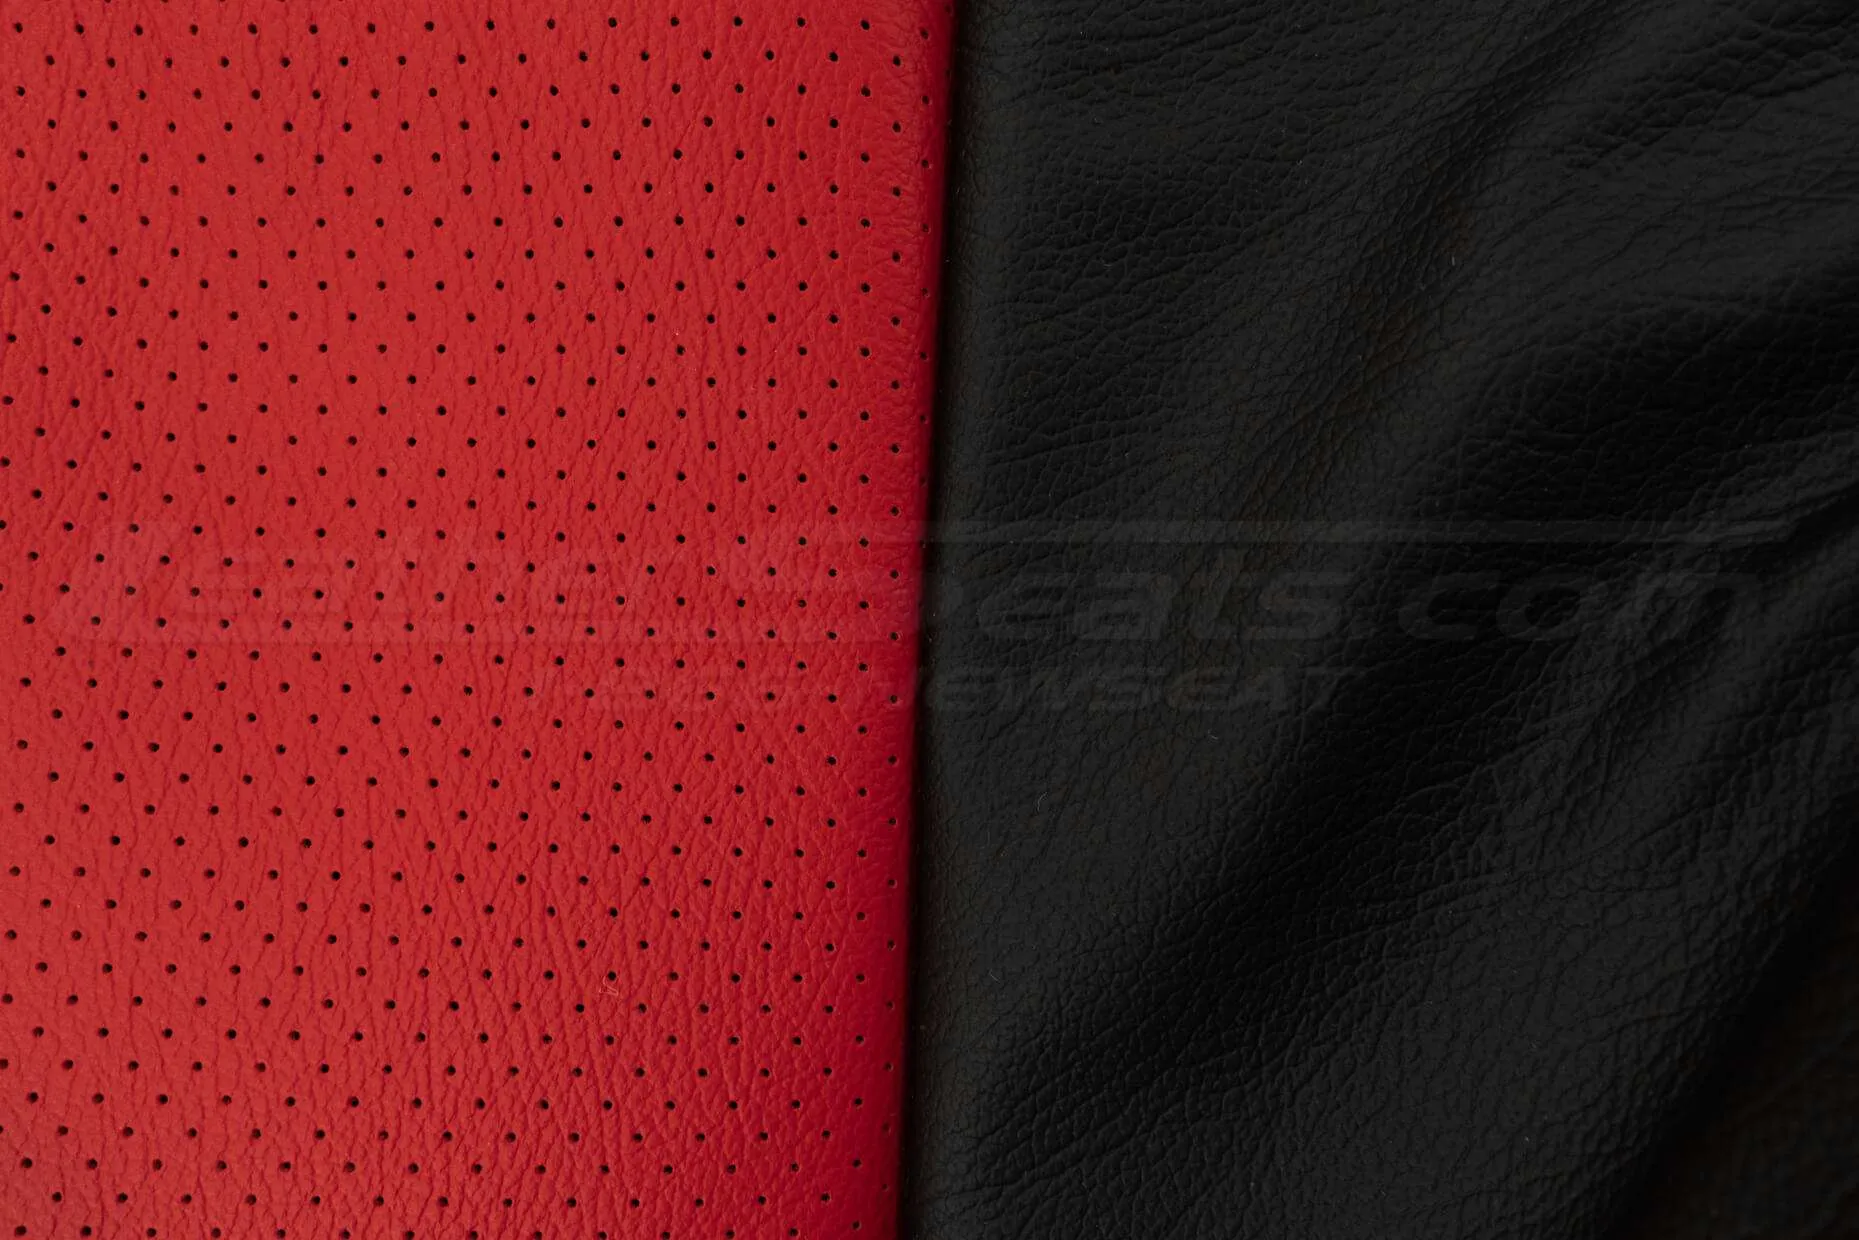 Chevrolet Camaro Leather Kit - Black & Bright Red - Perforation and leather texture